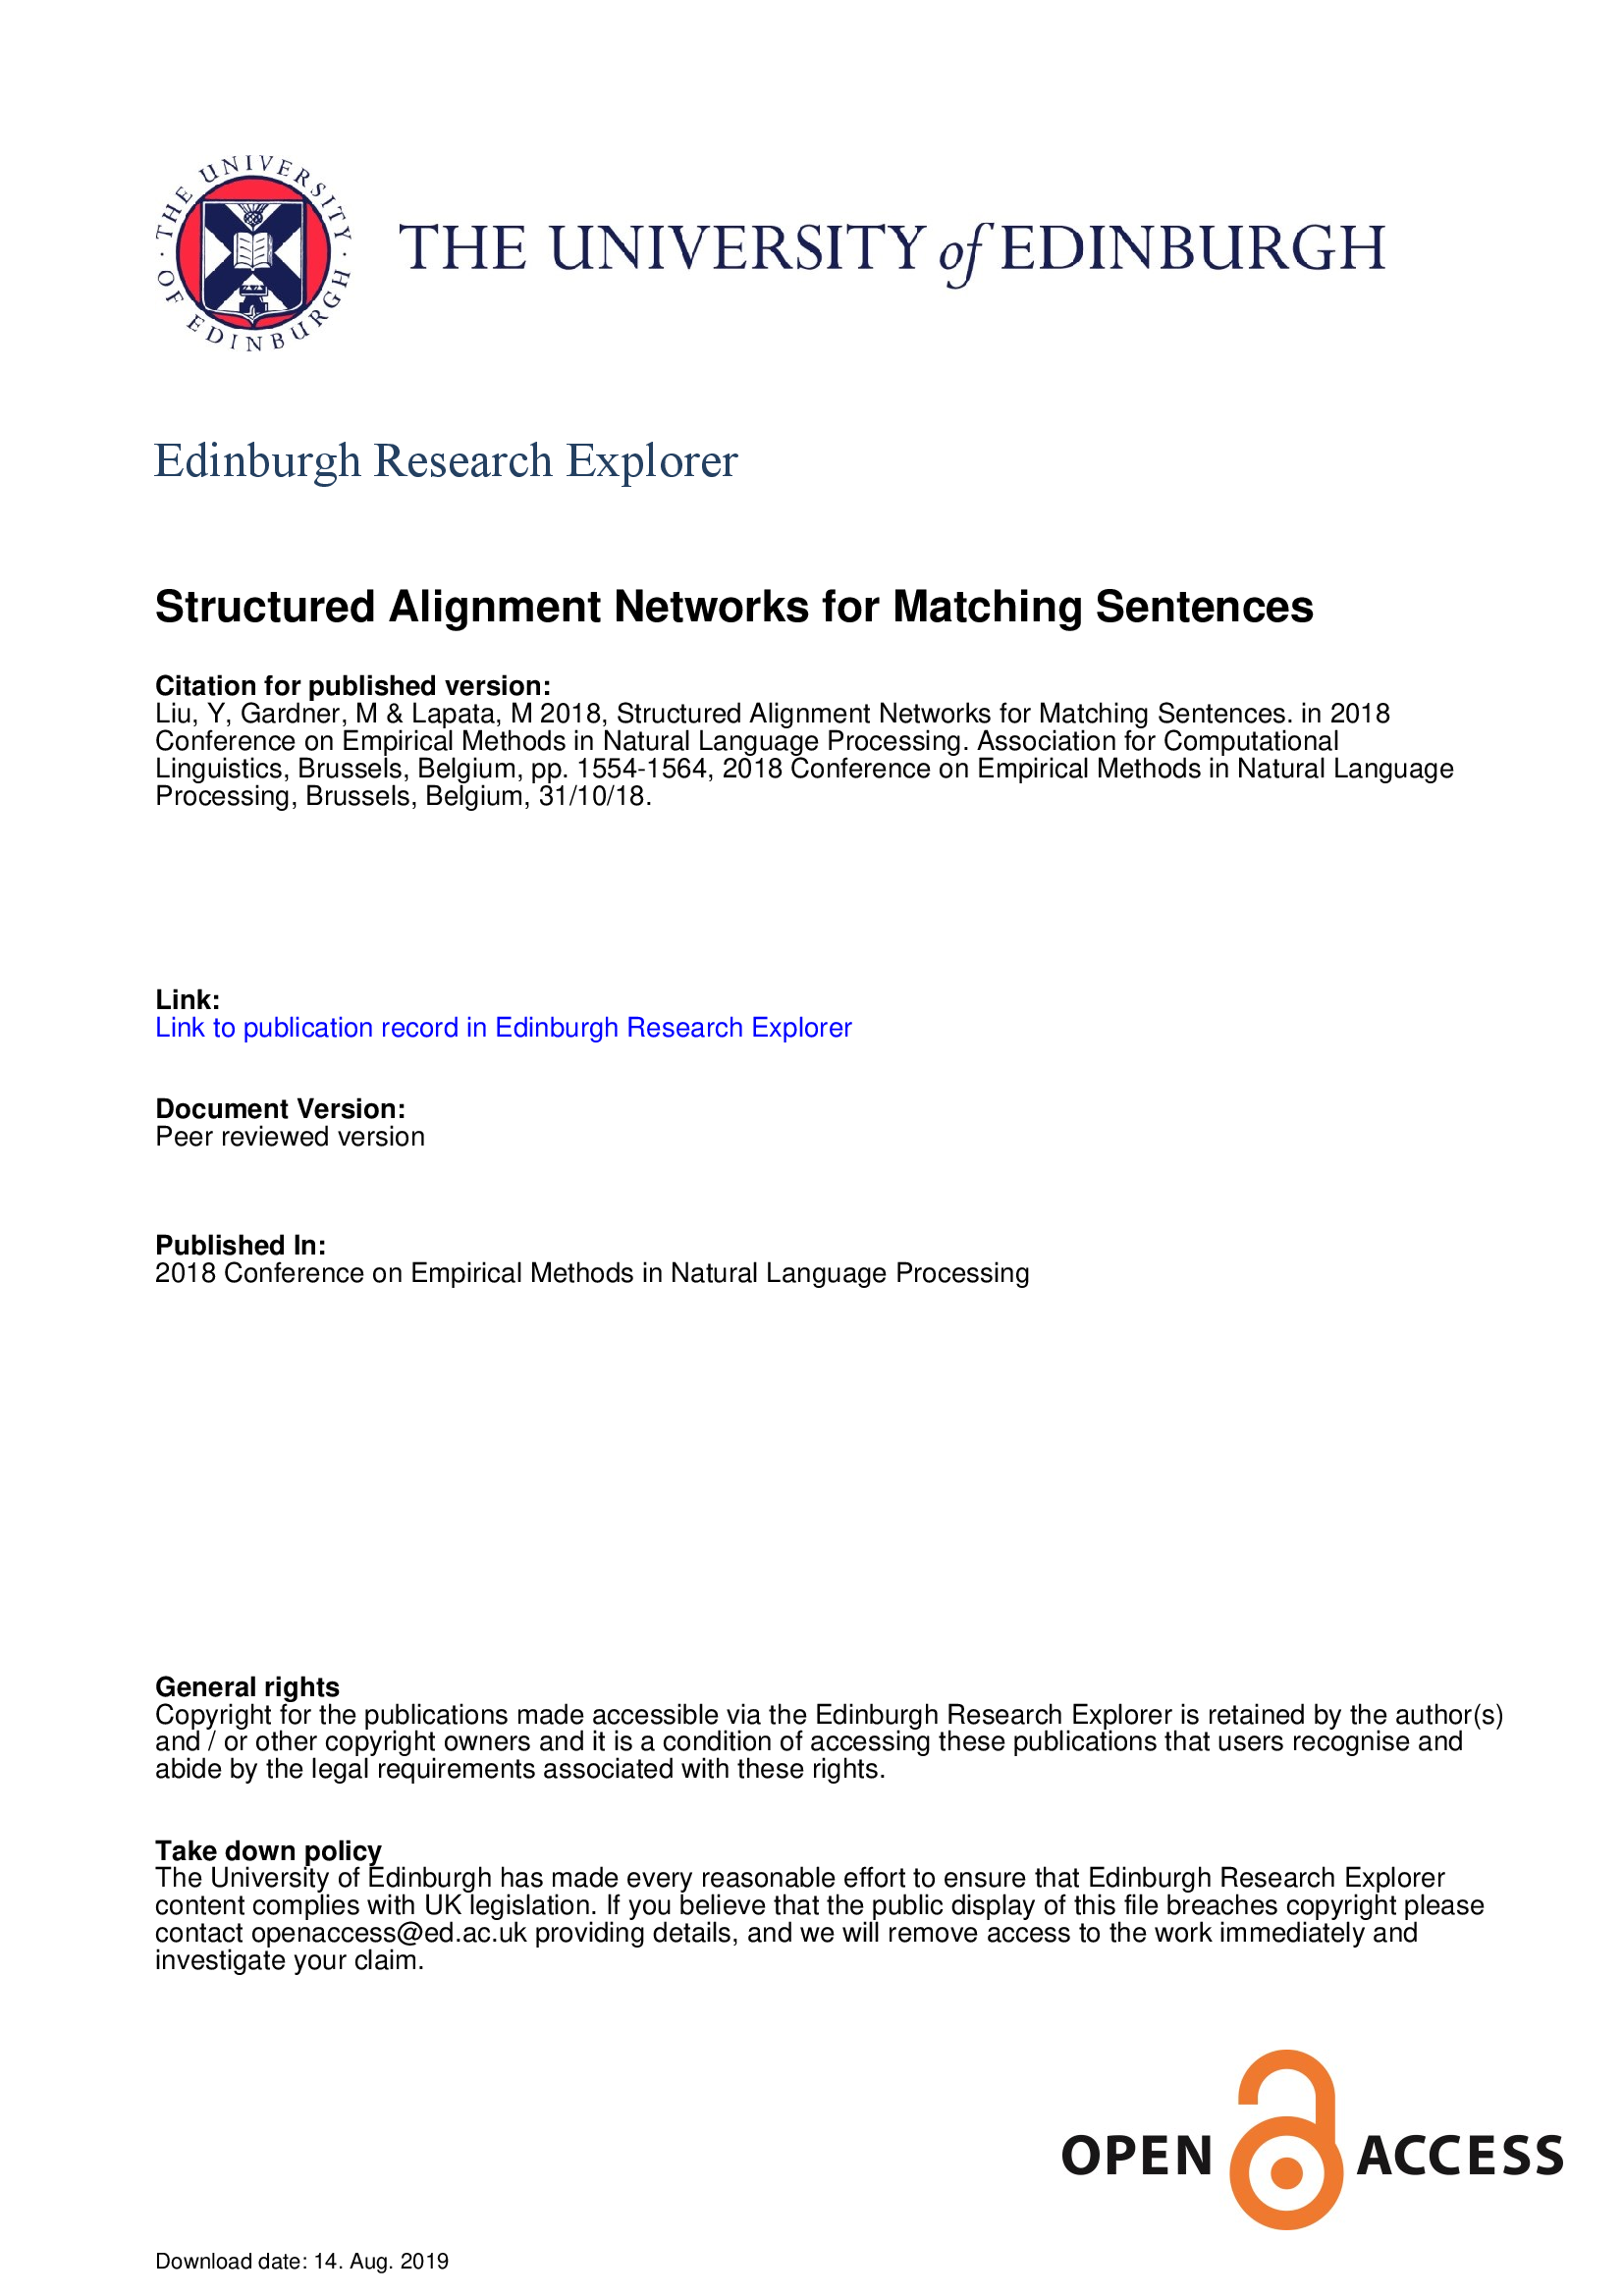 Structured Alignment Networks for Matching Sentences